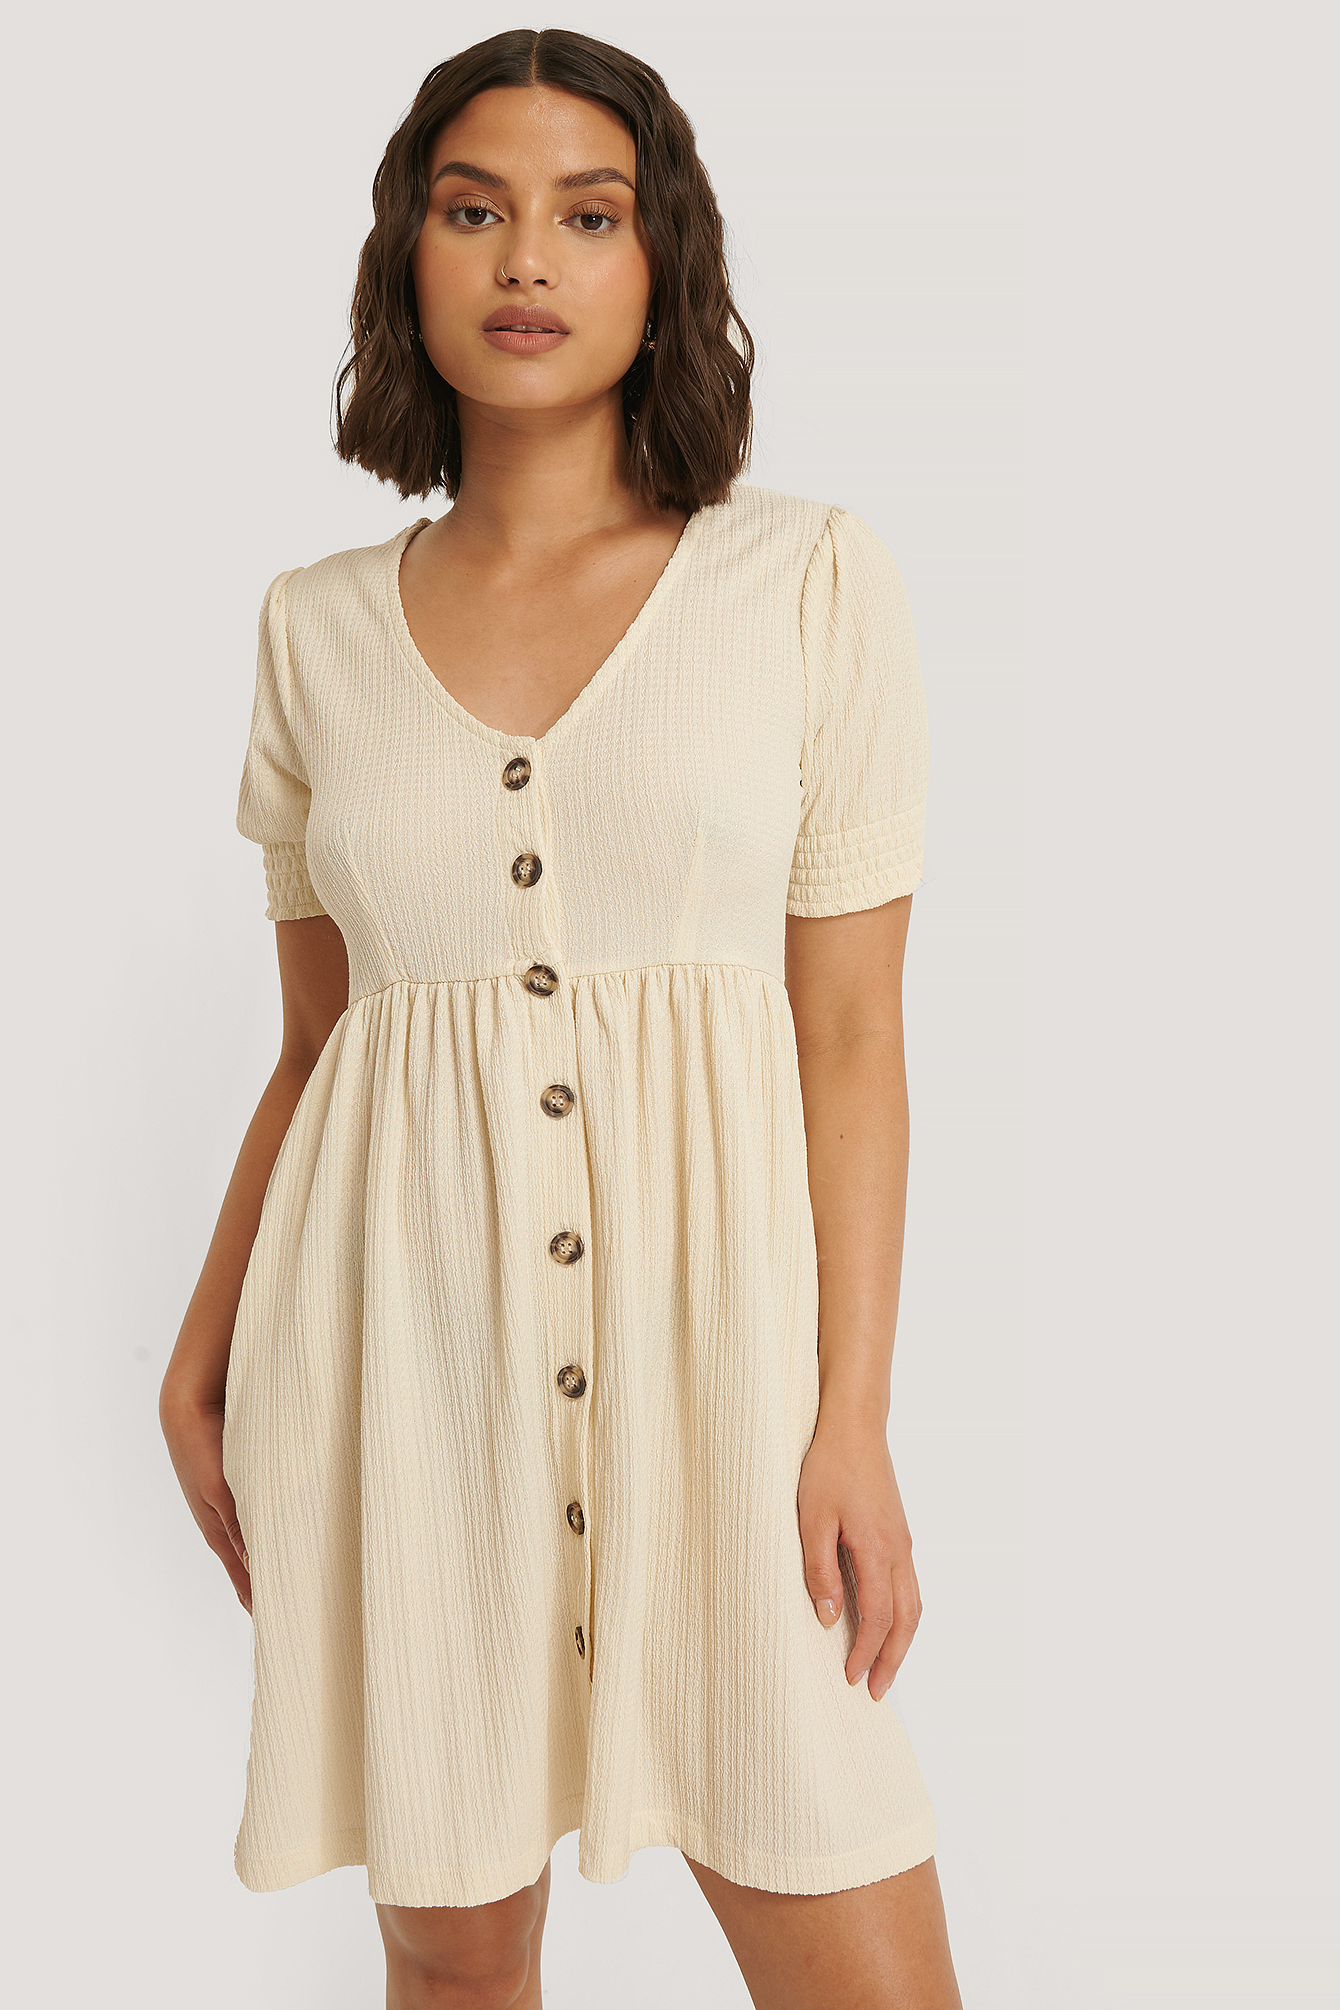 Dusty Light Beige Recycled Button Up Jersey Dress